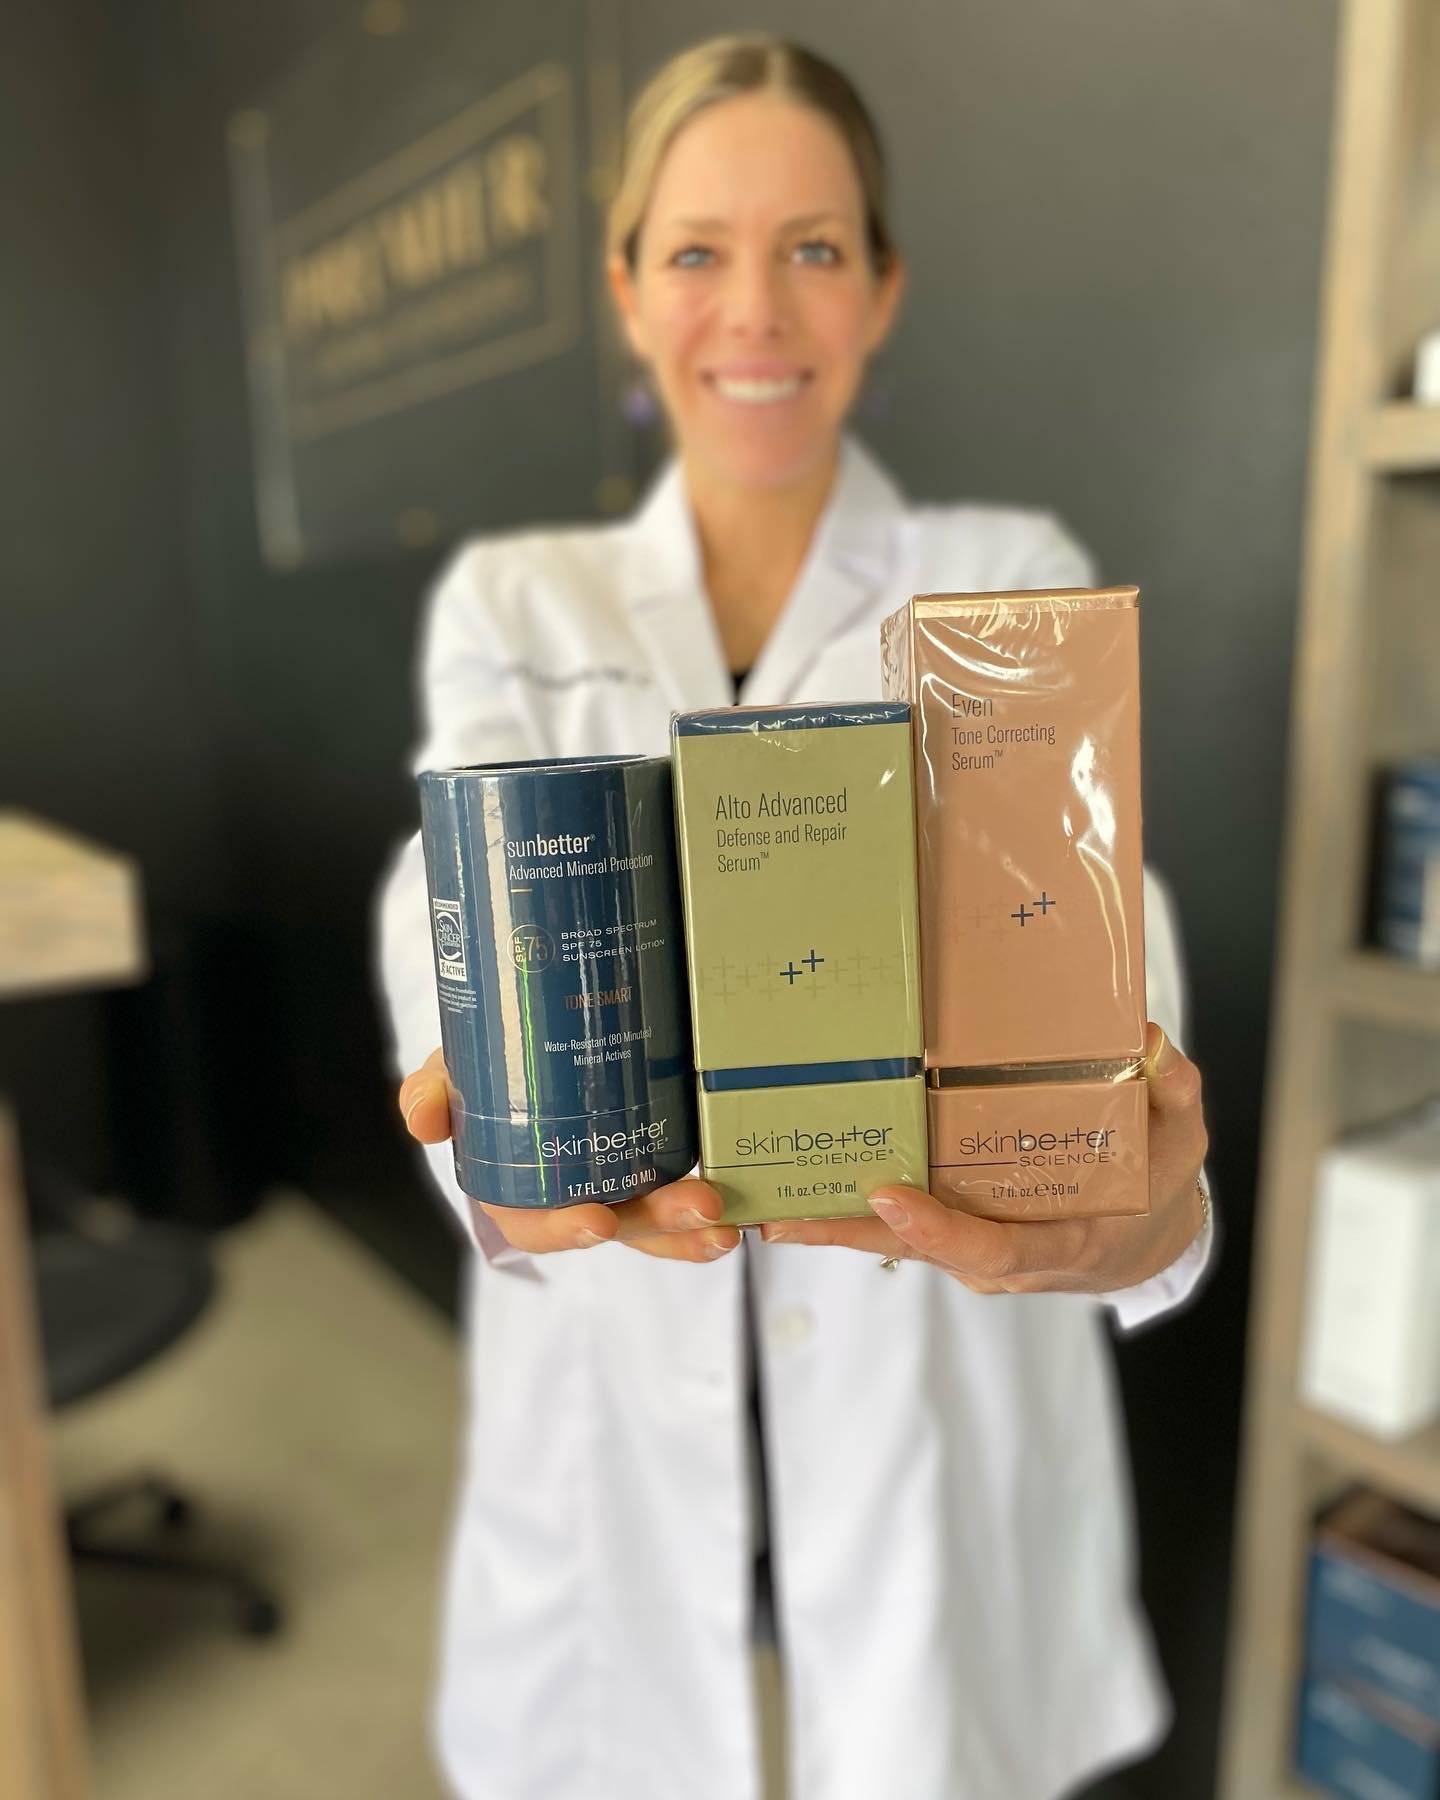 💕 Mother&rsquo;s Day Giveaway Alert! 💕

To celebrate all the amazing mamas out there, we&rsquo;re hosting a special giveaway! Win a luxurious medical grade skincare package from SkinBetter Science just in time for Mother&rsquo;s Day! 🌸

To enter:
